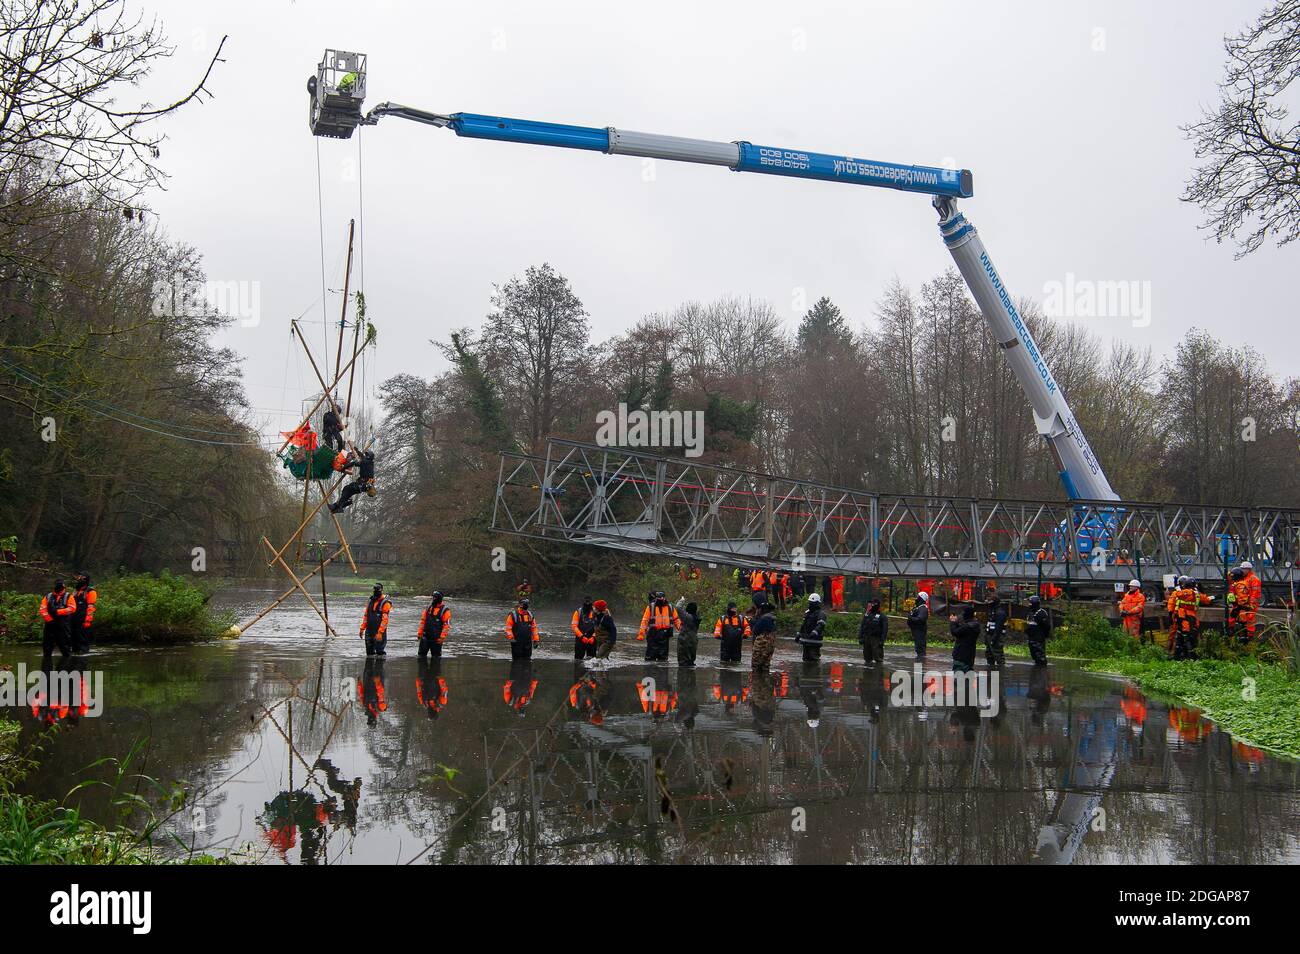 Denham, Buckinghamshire, UK. 8th December, 2020. In a huge HS2 and Police operation Police climbers were brought in today to pull eco warrior Dan Hooper known as Swampy out of a 30 feet high bamboo structure in the River Colne in Denham Country Park that he was locked onto. Activists were trying to stop HS2 putting a temporary bridge across the River Colne. Swampy was taken away by Police for questioning. Two protesters were dramatically pulled through the ice cold water by Police. Credit: Maureen McLean/Alamy Live News Stock Photo